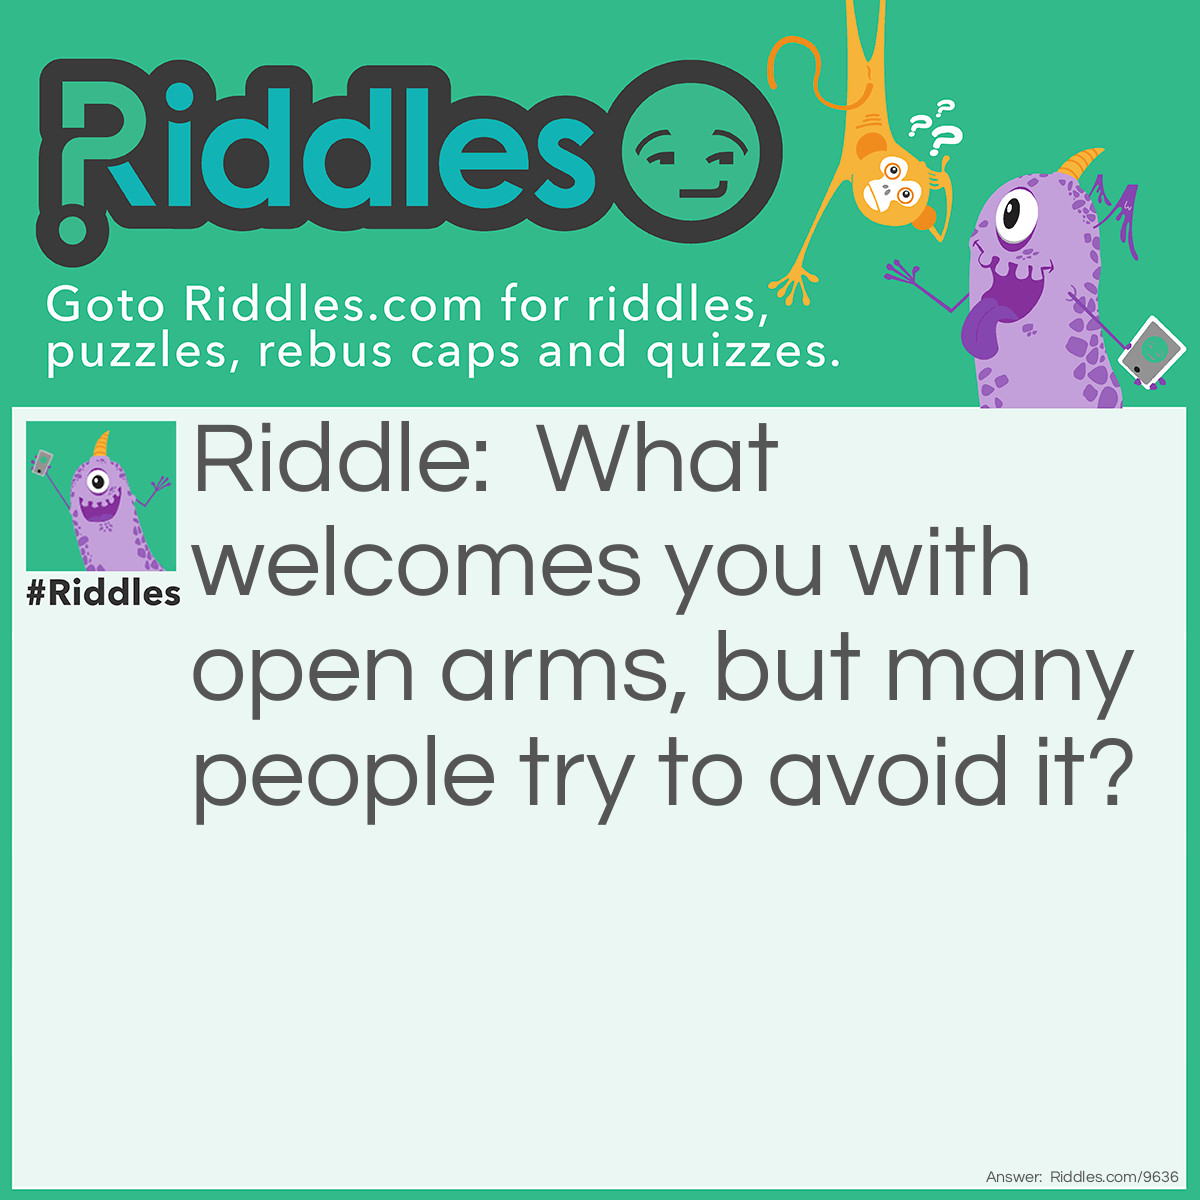 Riddle: What welcomes you with open arms, but many people try to avoid it? Answer: Death.